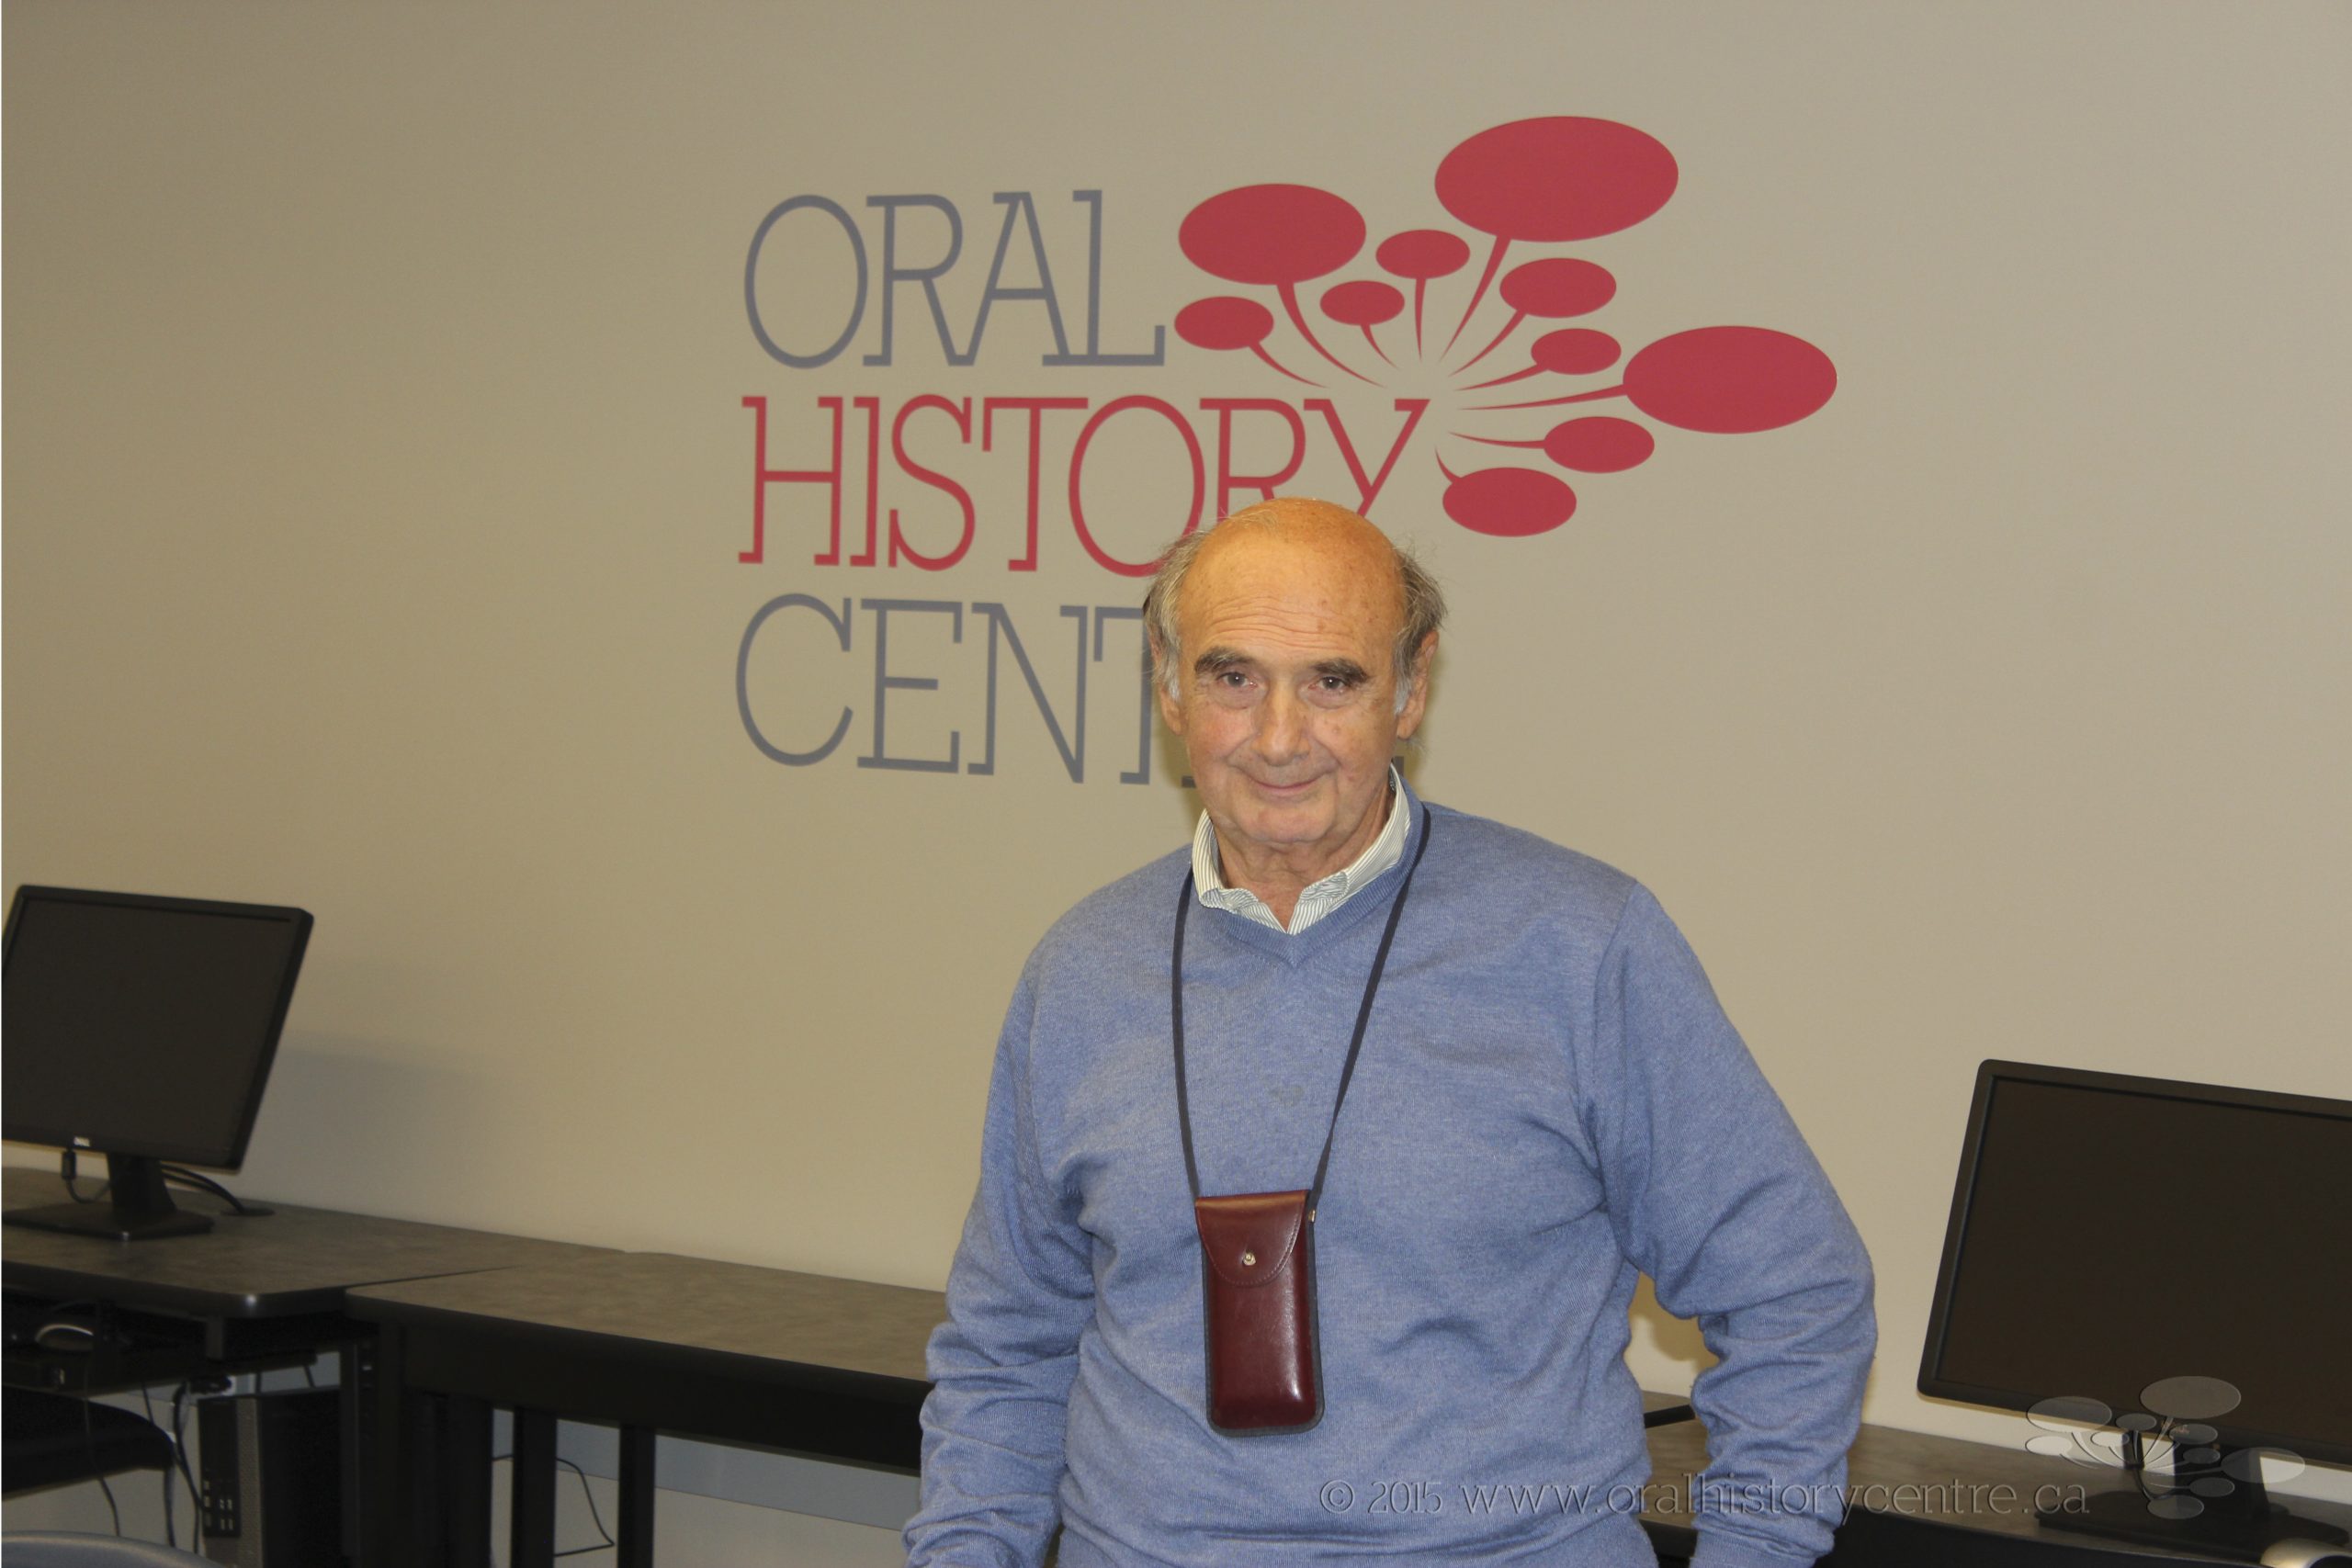 Photo of Dr. Alessandro Portelli in front of a beige wall background with Oral History Centre logo.